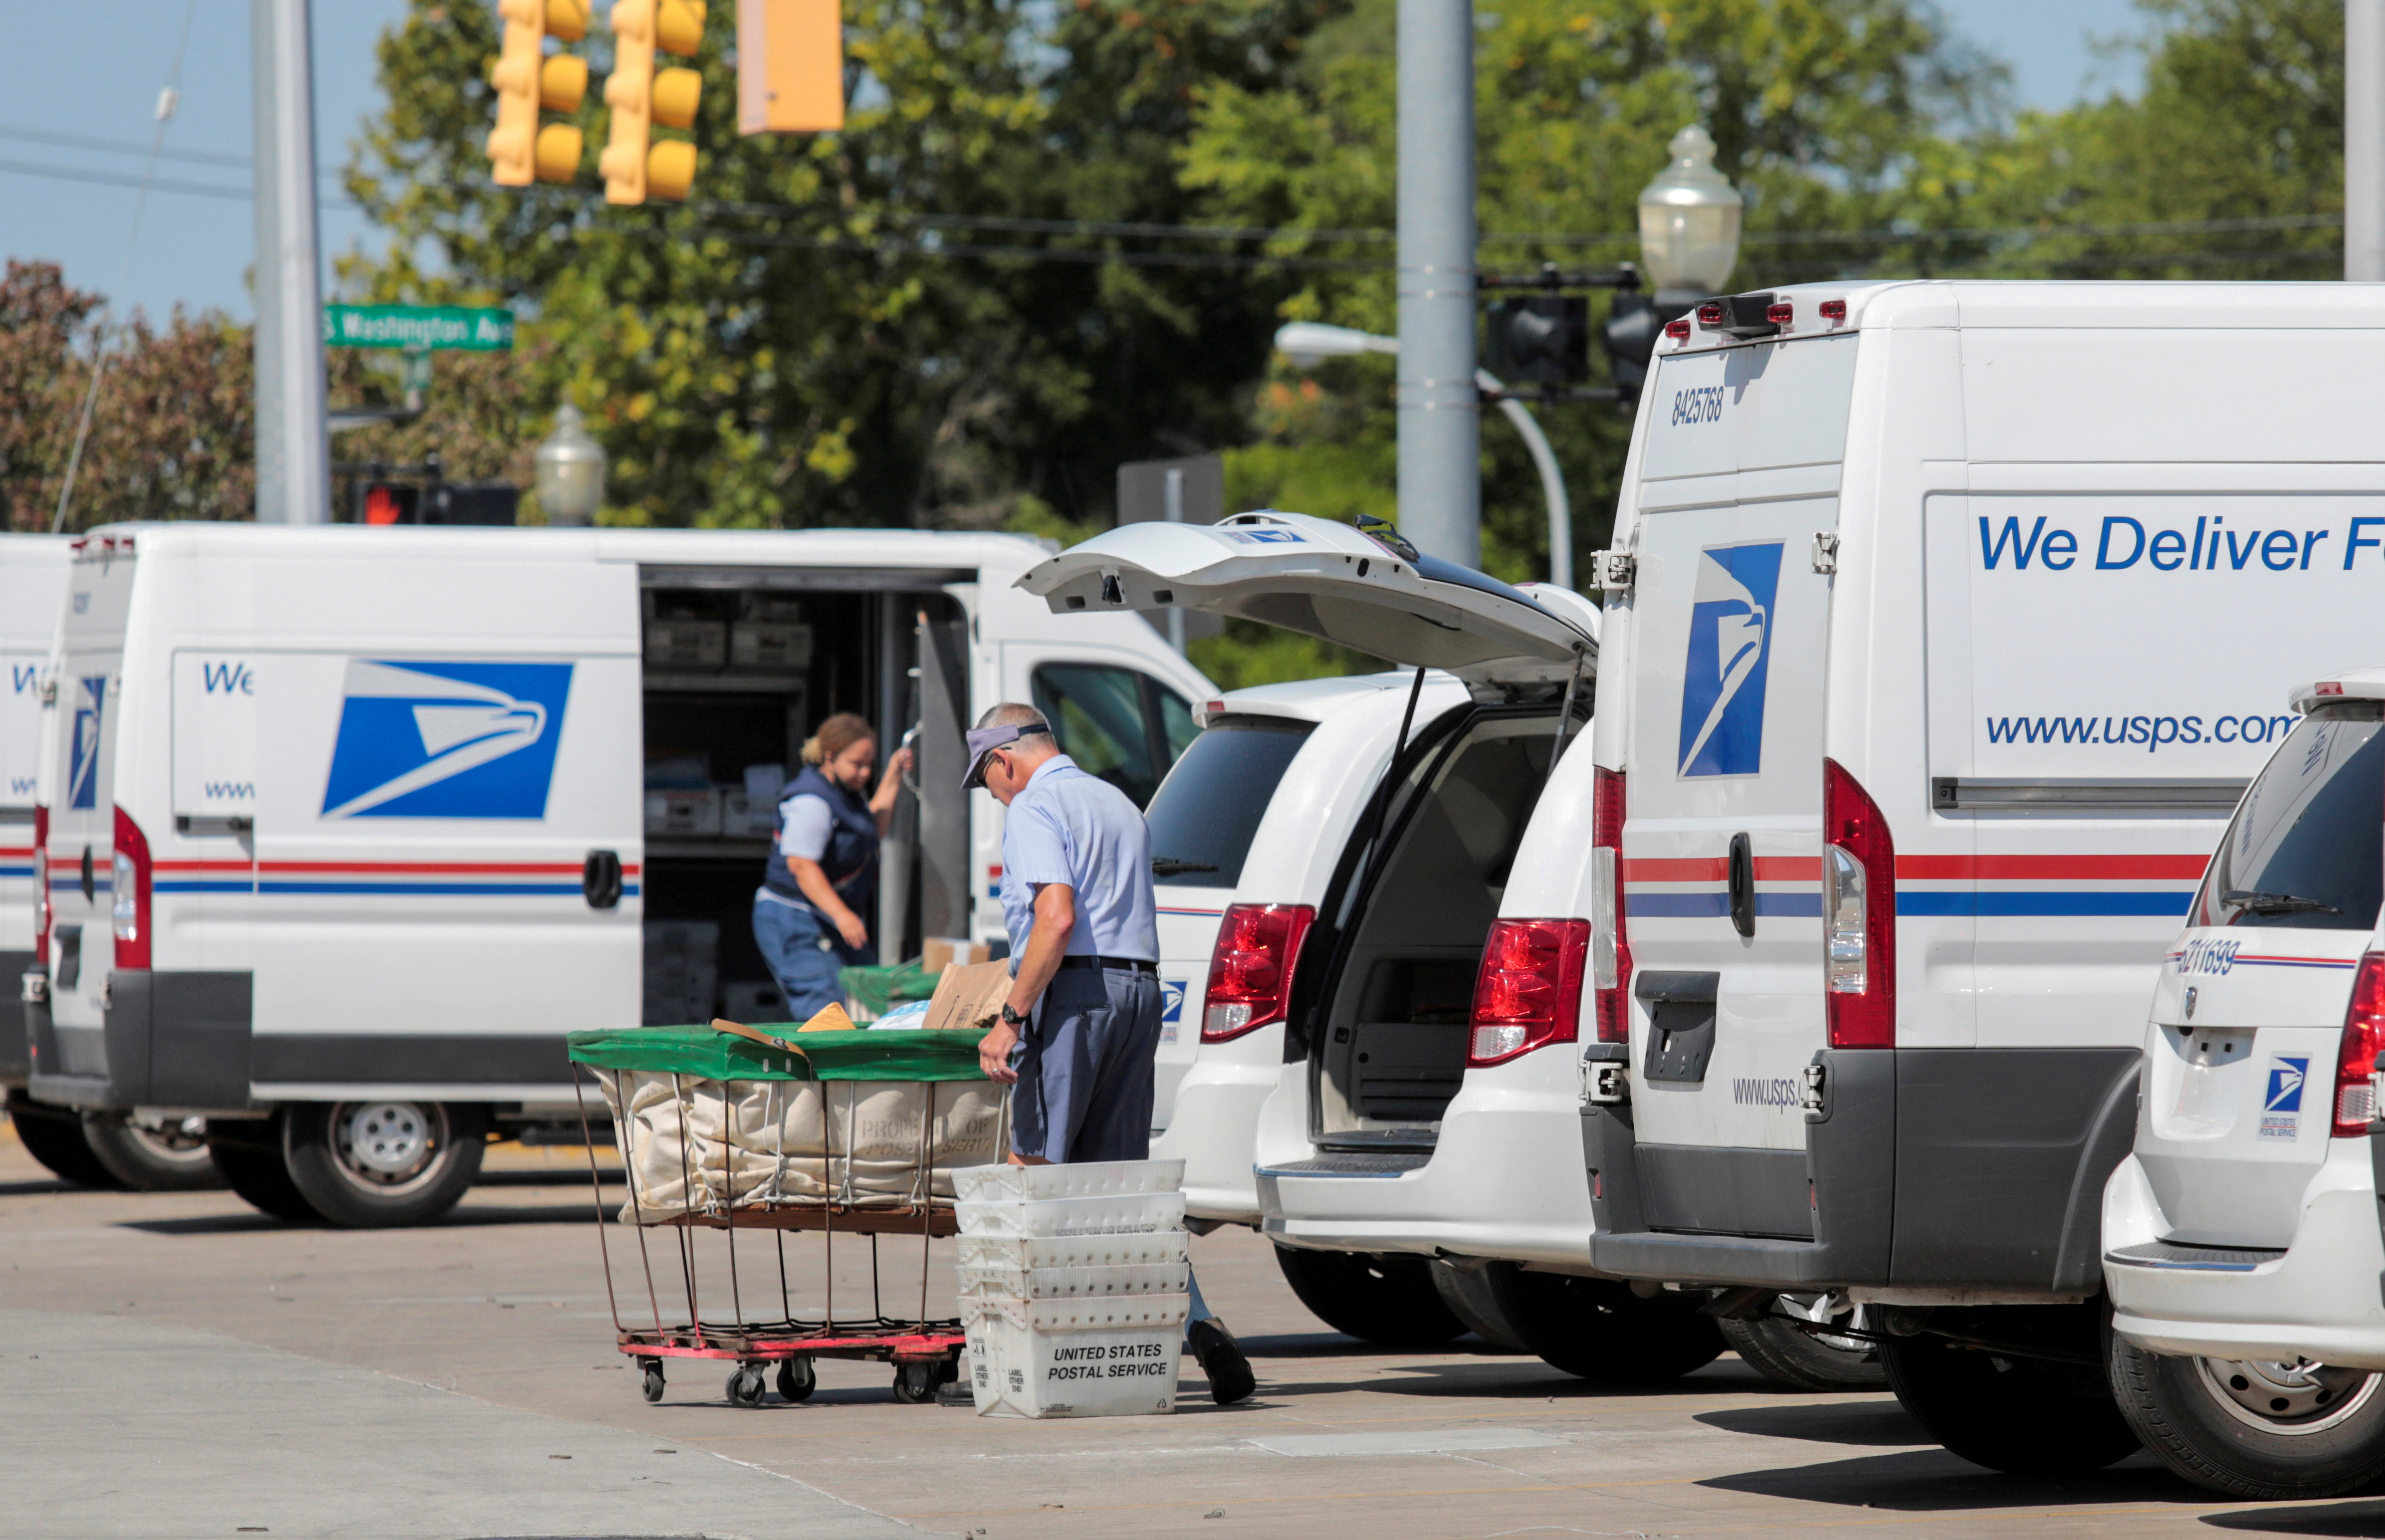 United States Postal Service workers load mail into delivery trucks outside a post office in Royal Oak